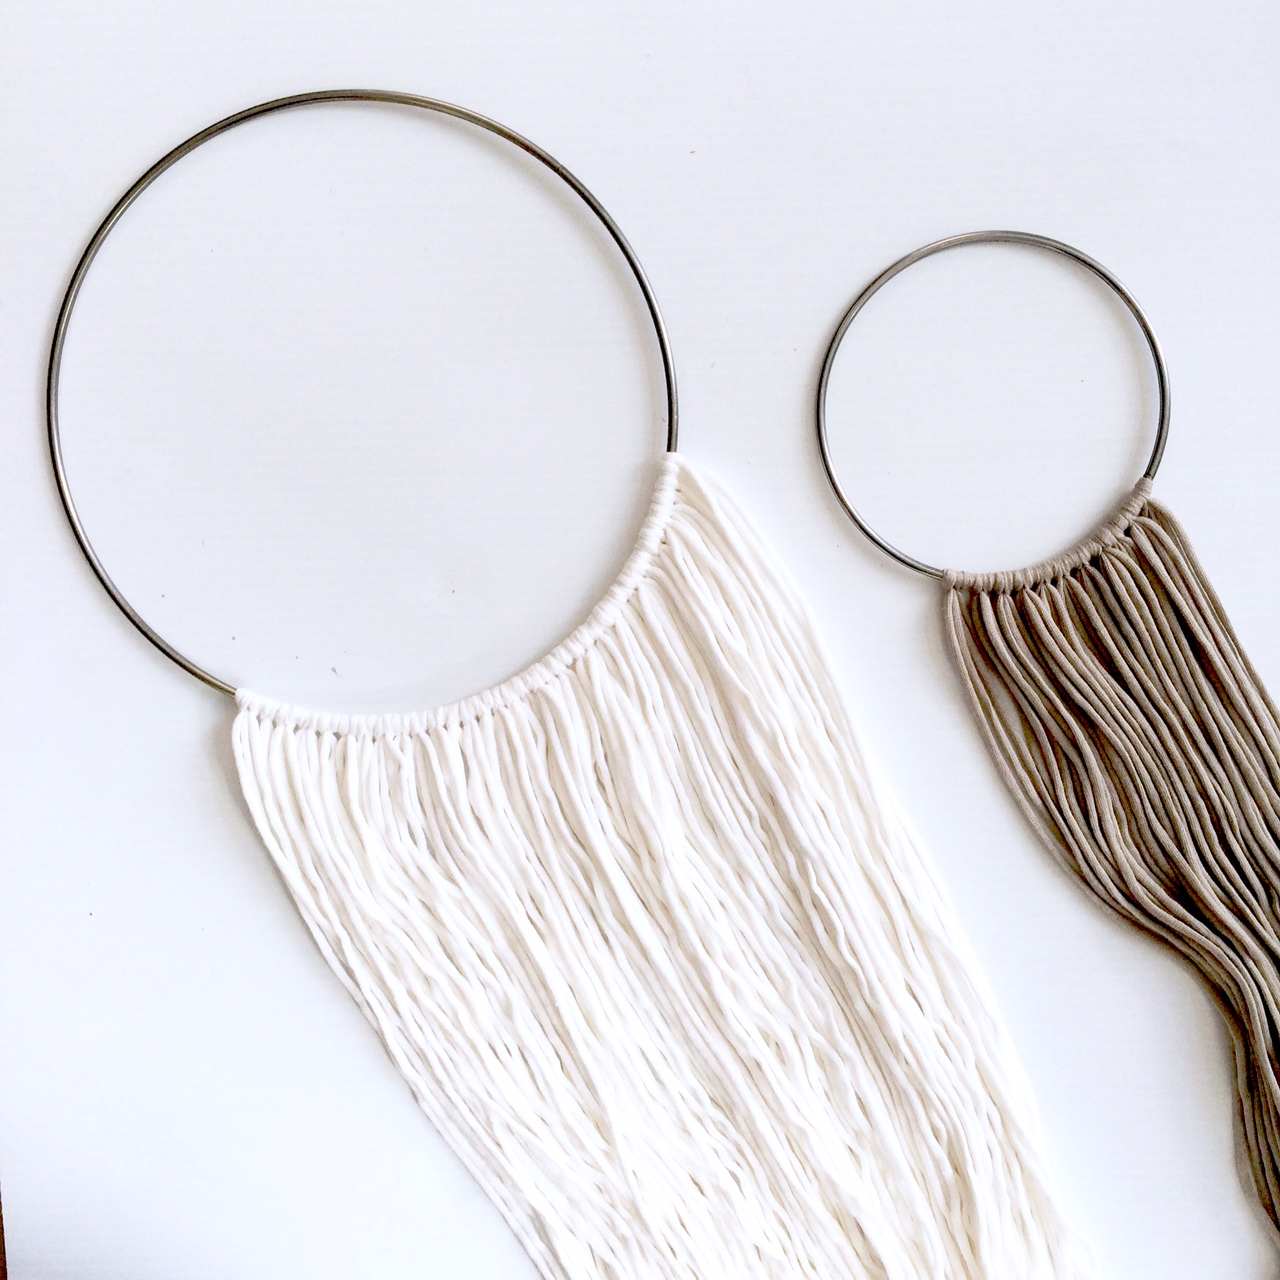 How to Make Yarn Art Rings to Hang On Your Wall